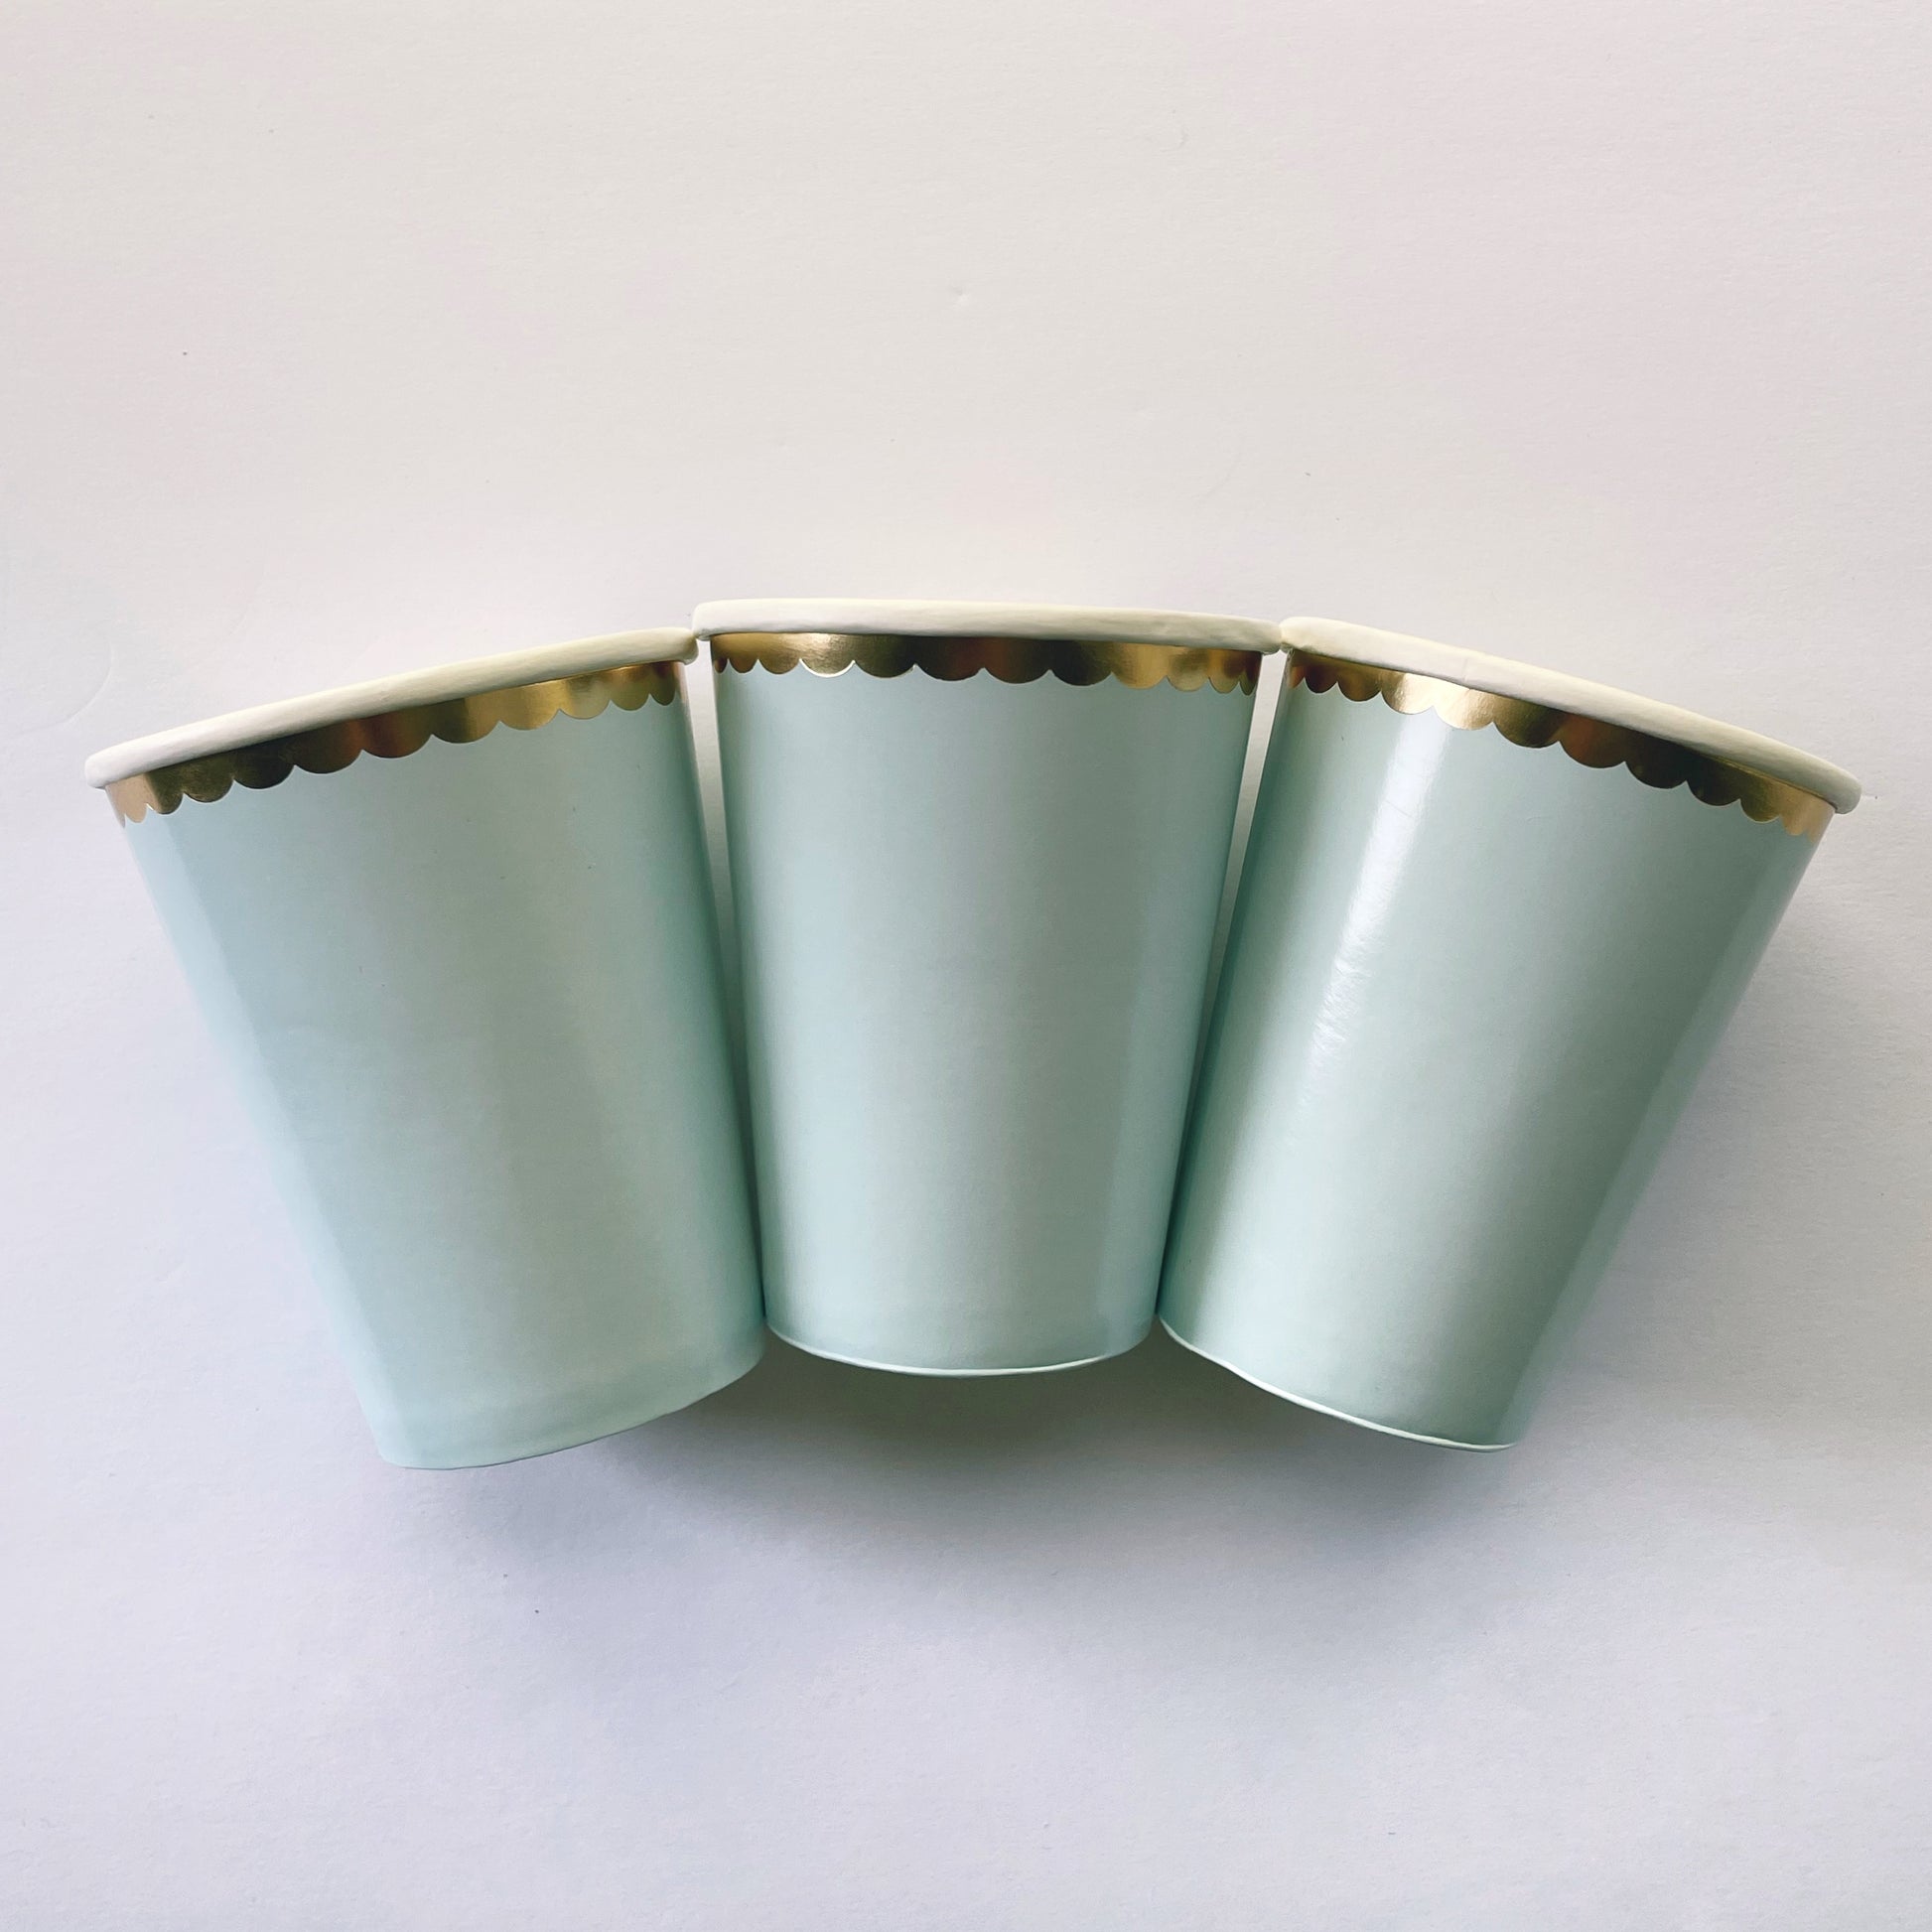 The paper party cups are a pale pastel blue colour with gold foil detail.